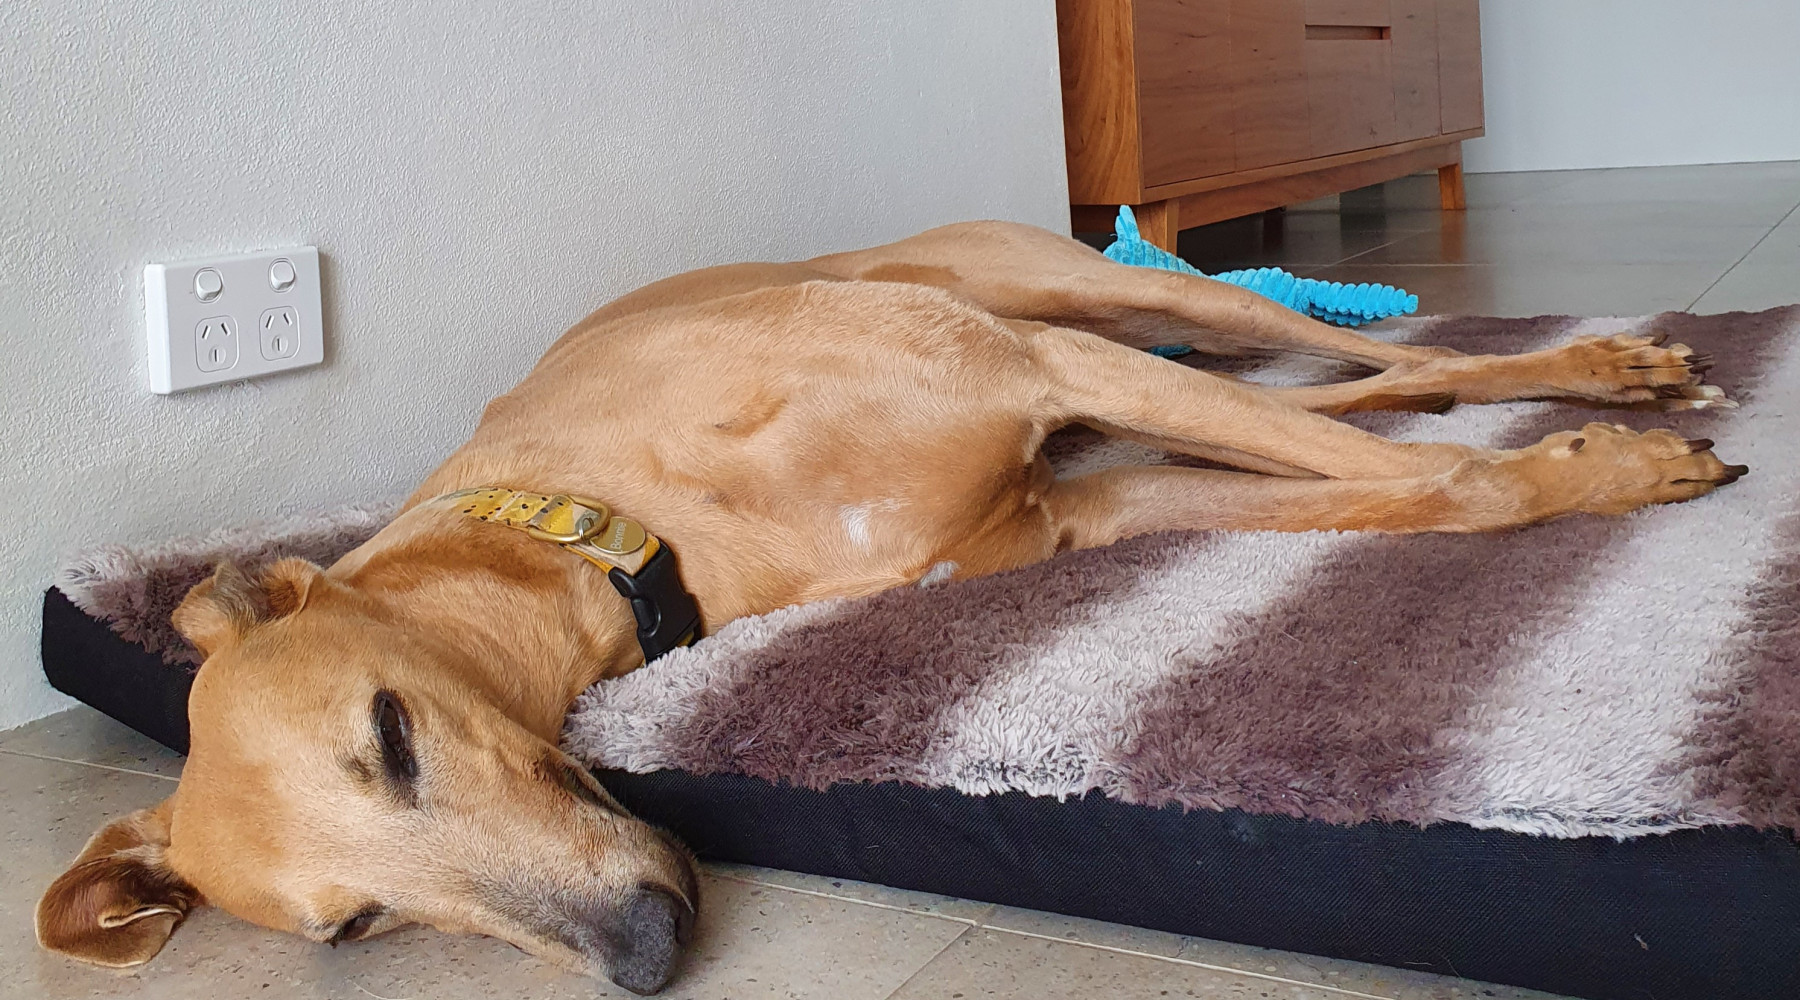 Focus Care's greyhound pet therapy dog sleeping on her bed